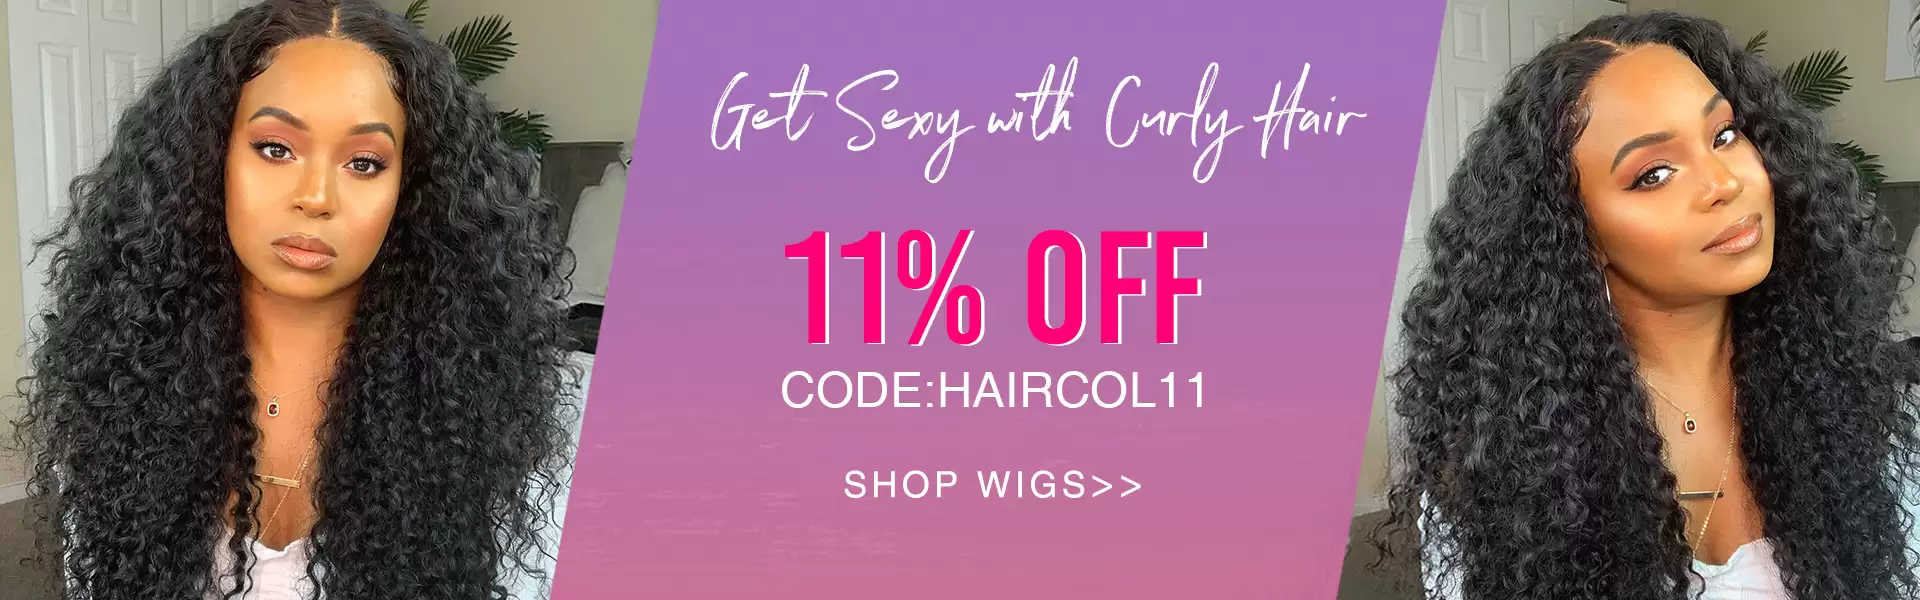 Get 11% Off On Wigs With This Discount Coupon At Jurllyshe.Com